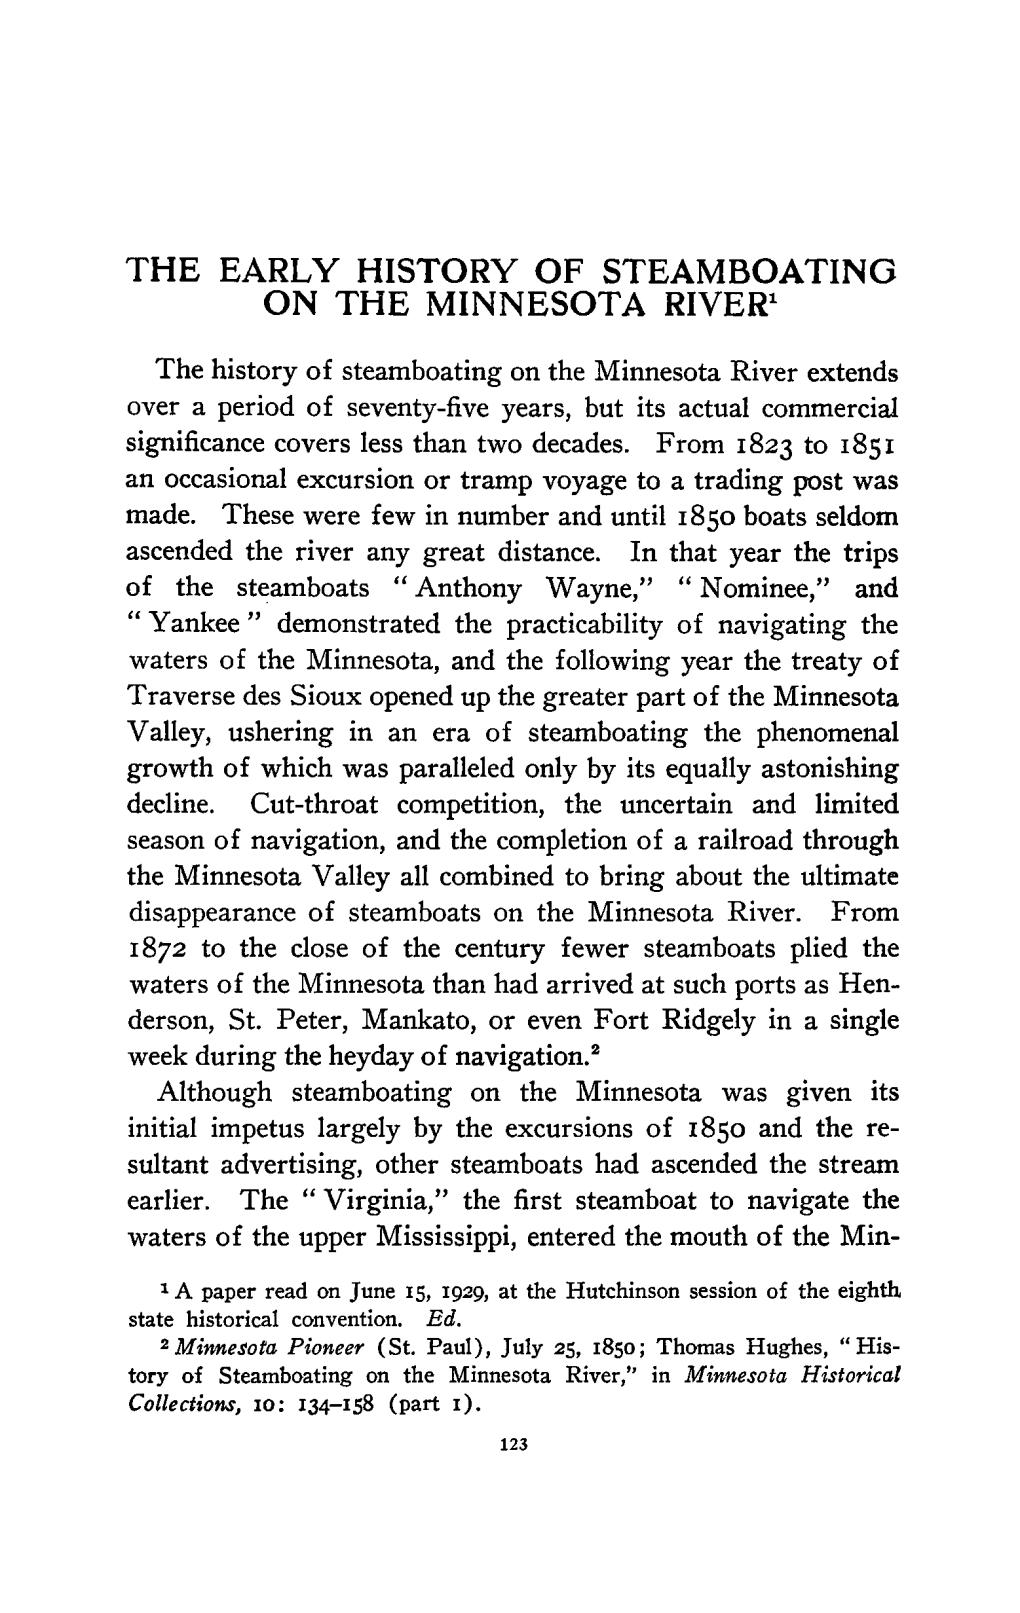 The Early History of Steamboating on the Minnesota River / [William J. Petersen]